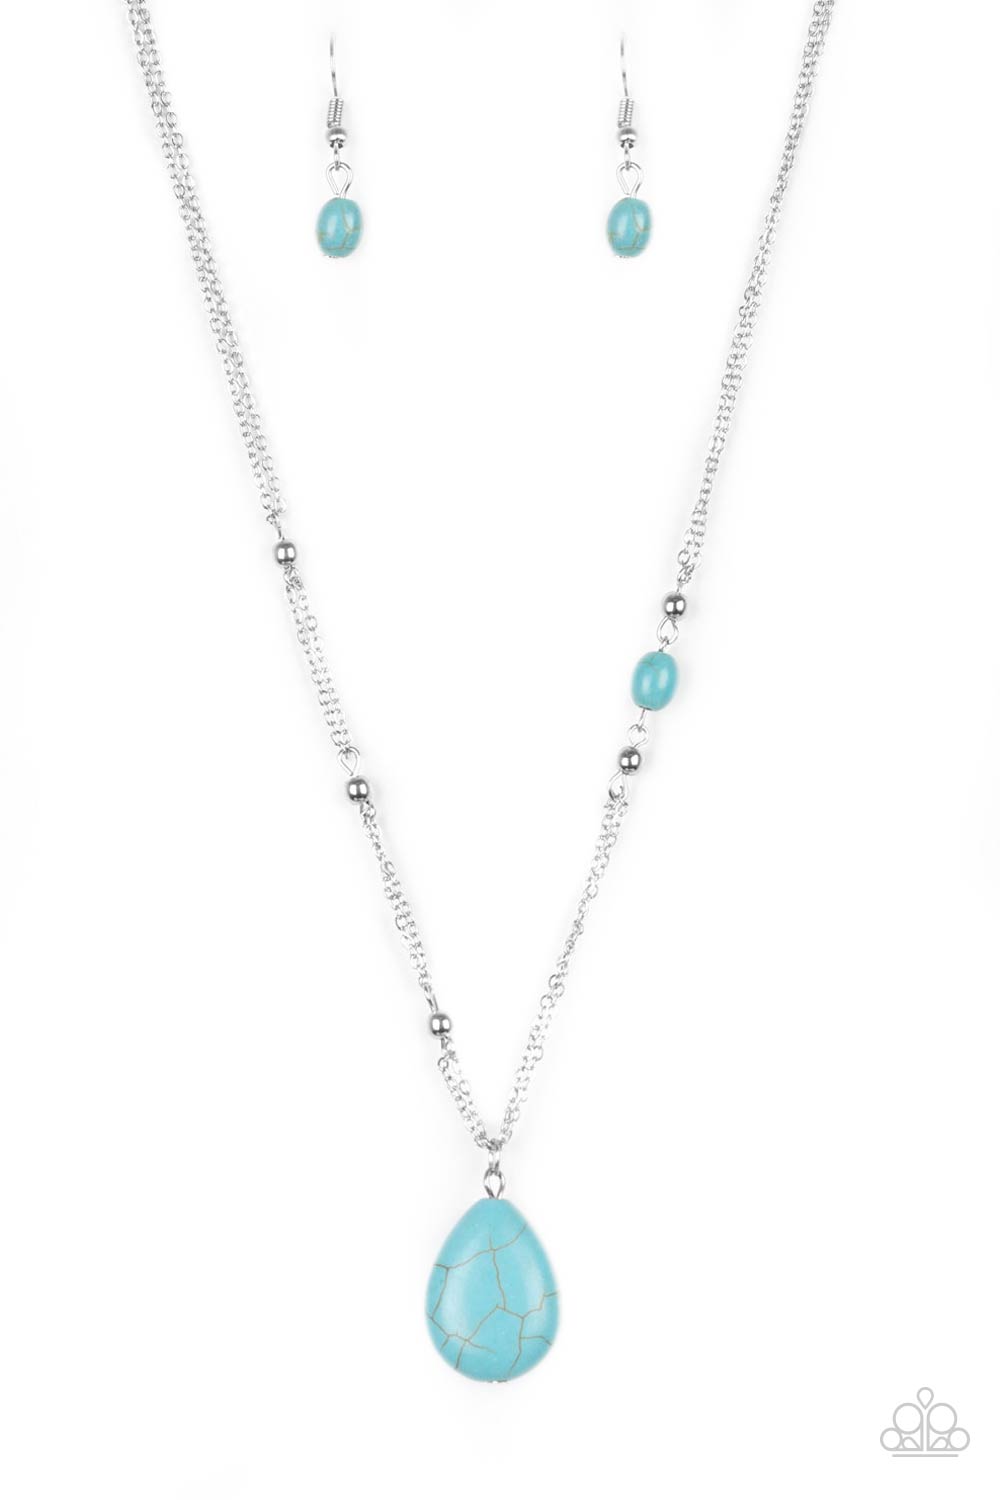 Peaceful Prairies Turquoise Blue Stone Necklace - Paparazzi Accessories- lightbox - CarasShop.com - $5 Jewelry by Cara Jewels